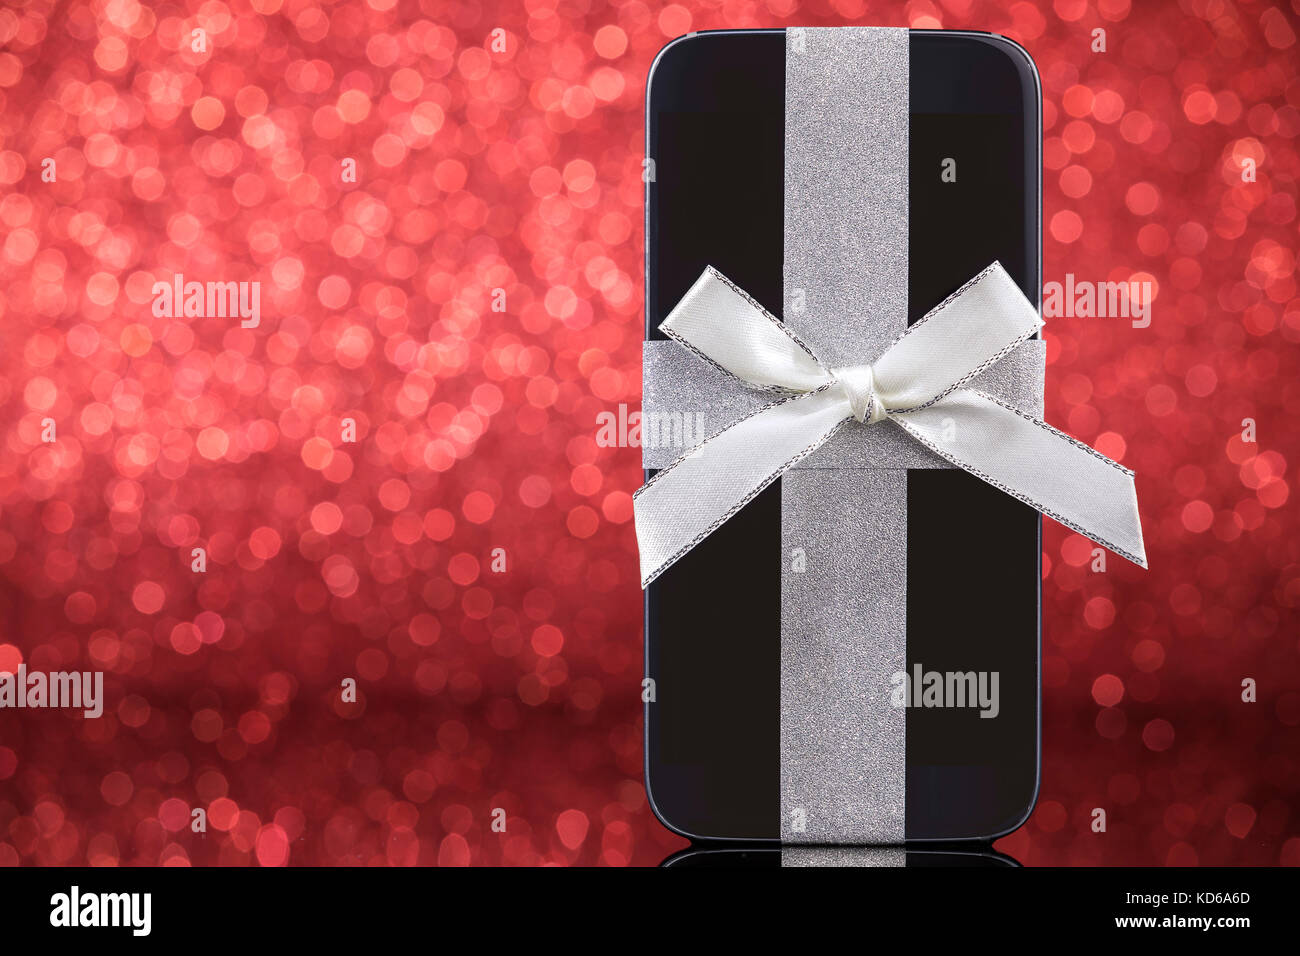 Smartphone for Christmas gift on black glass table over red background. Focus on smartphone. Stock Photo